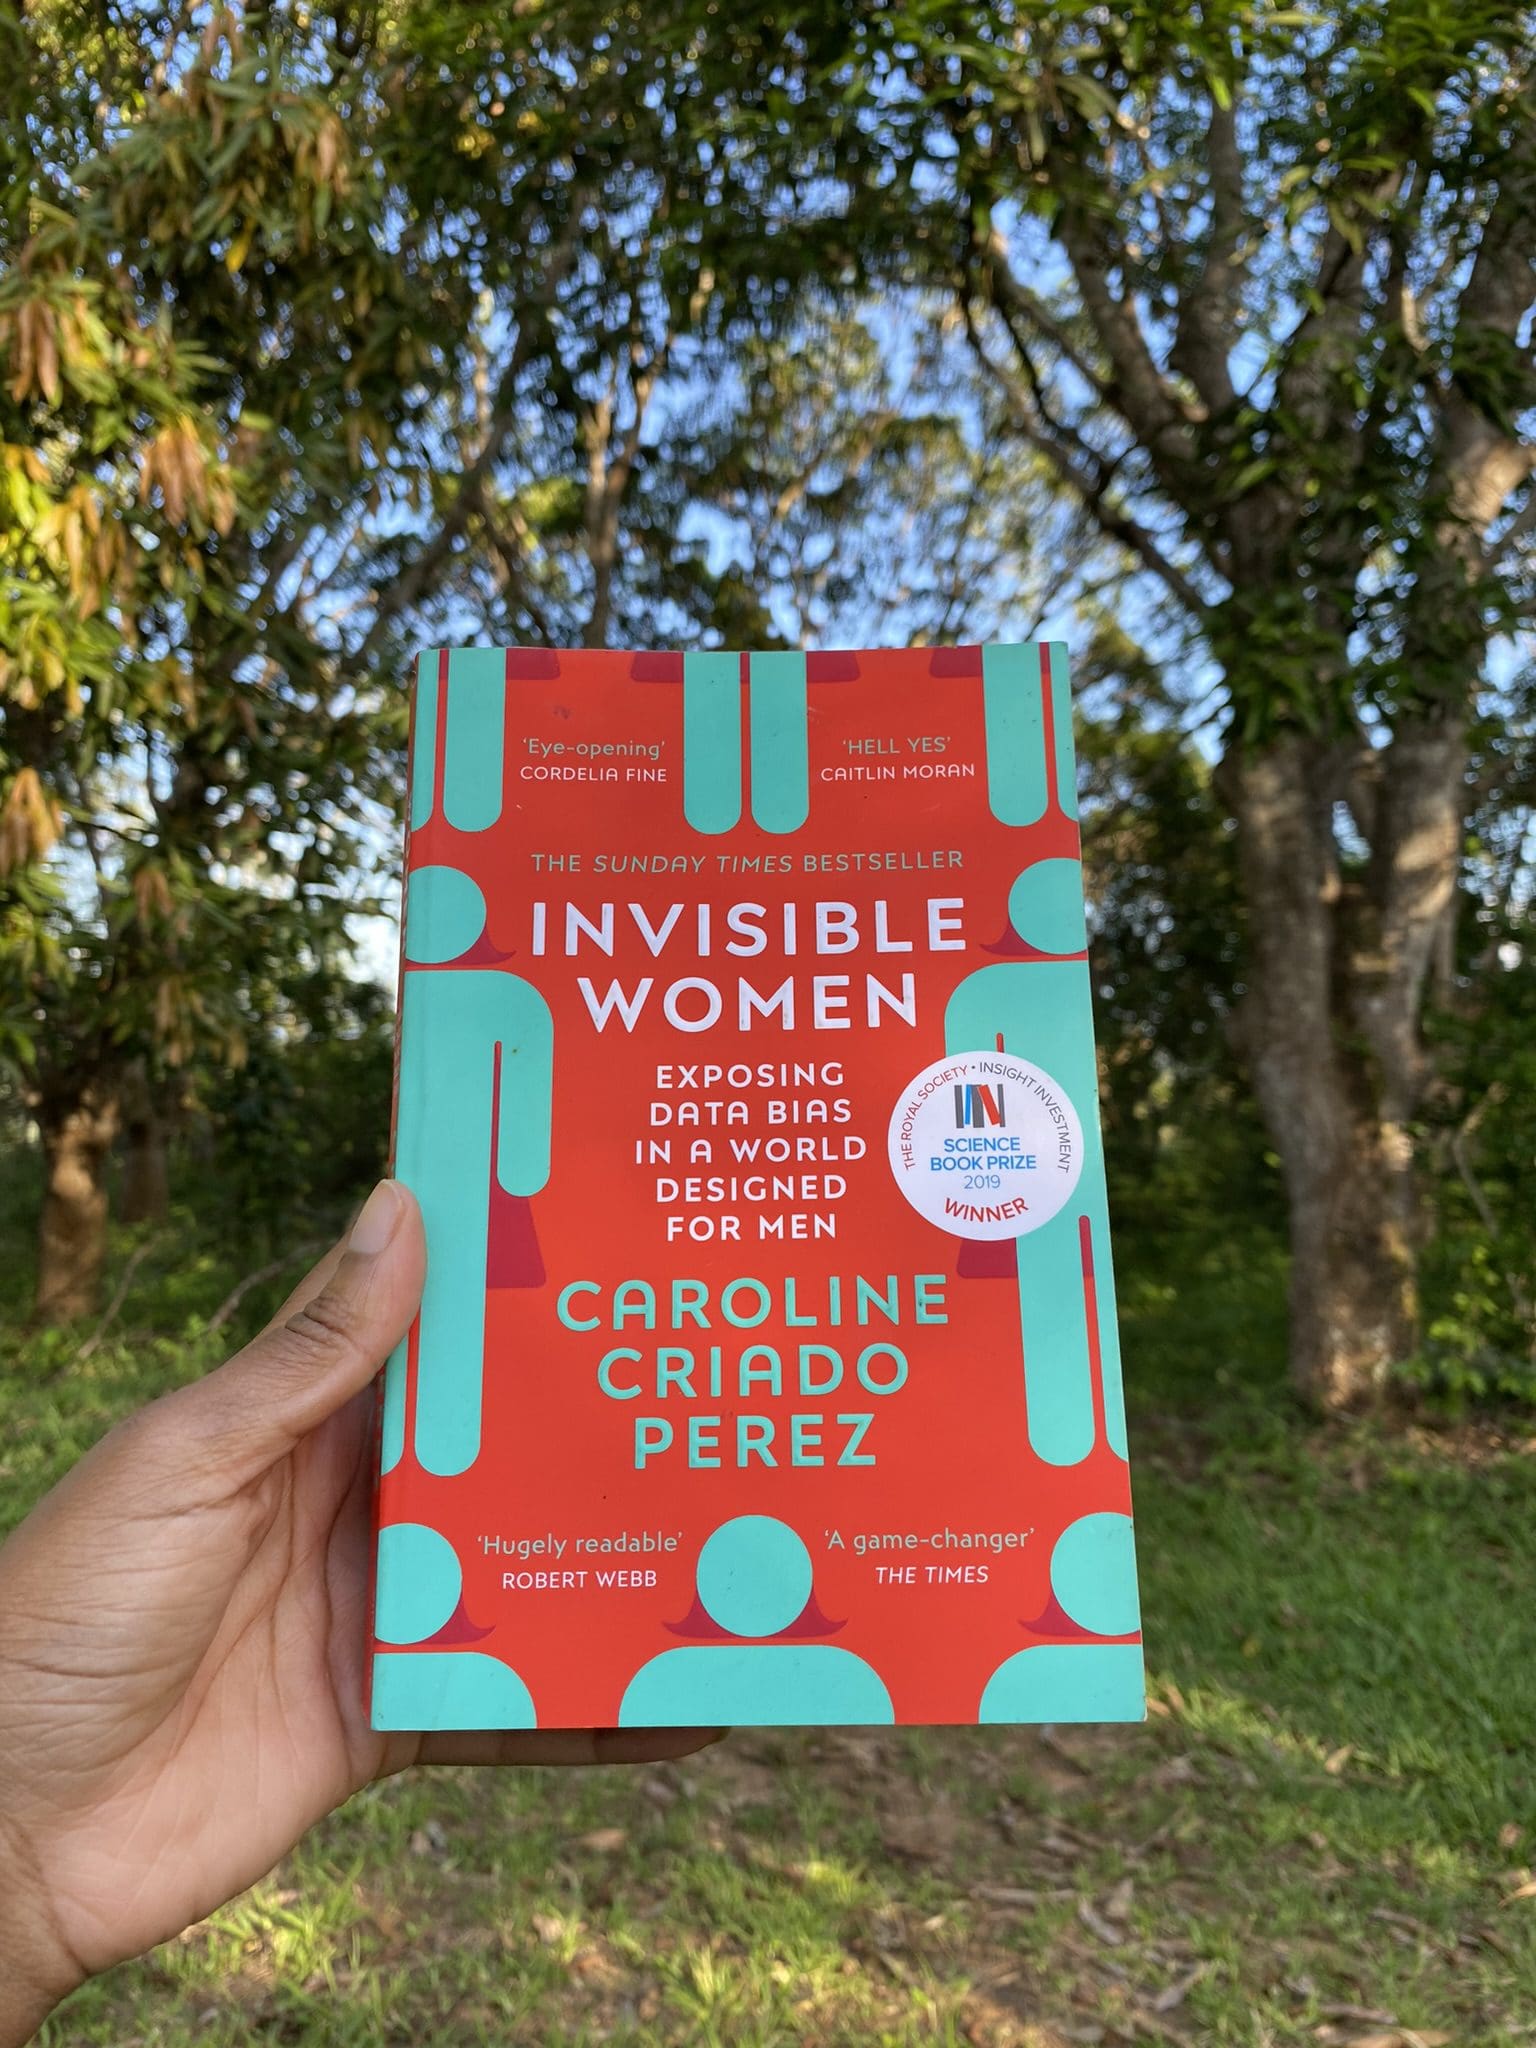 A Black lady's hand holding a copy of Invisible Women Data Bias in a World Designed for Men by Caroline Criado Pérez with a view of trees in the background